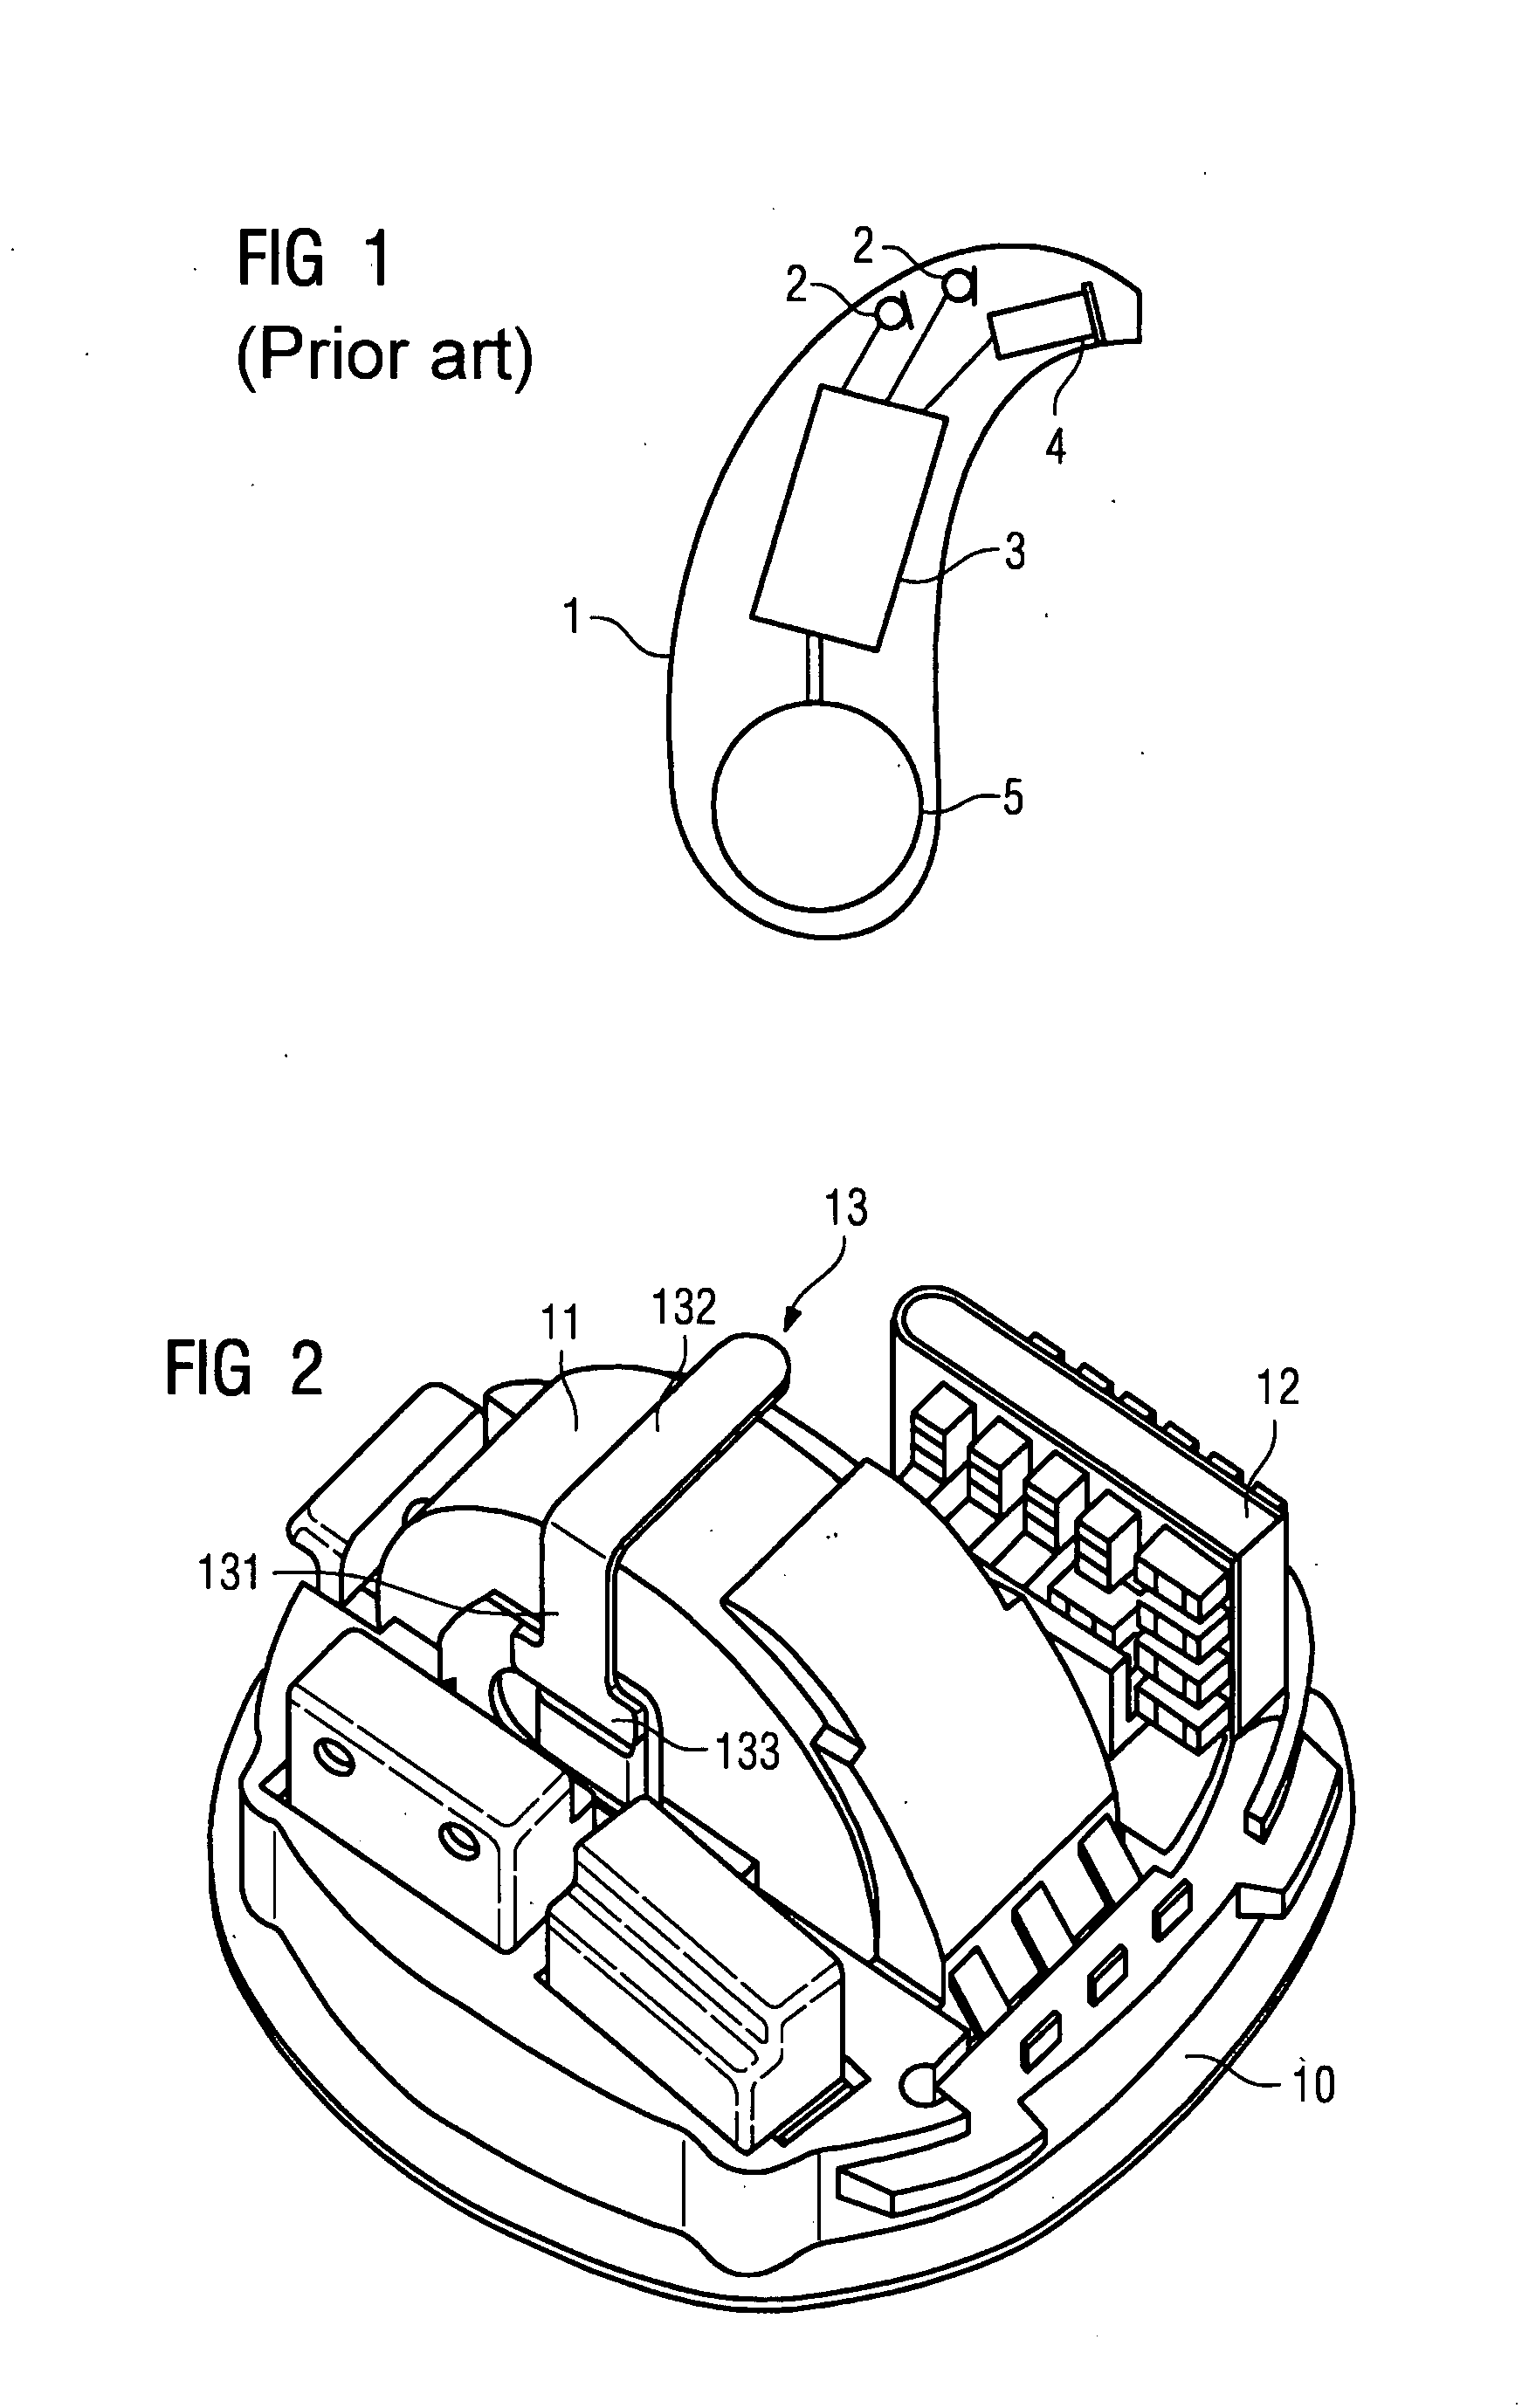 Hearing device with current-conducting metal arm